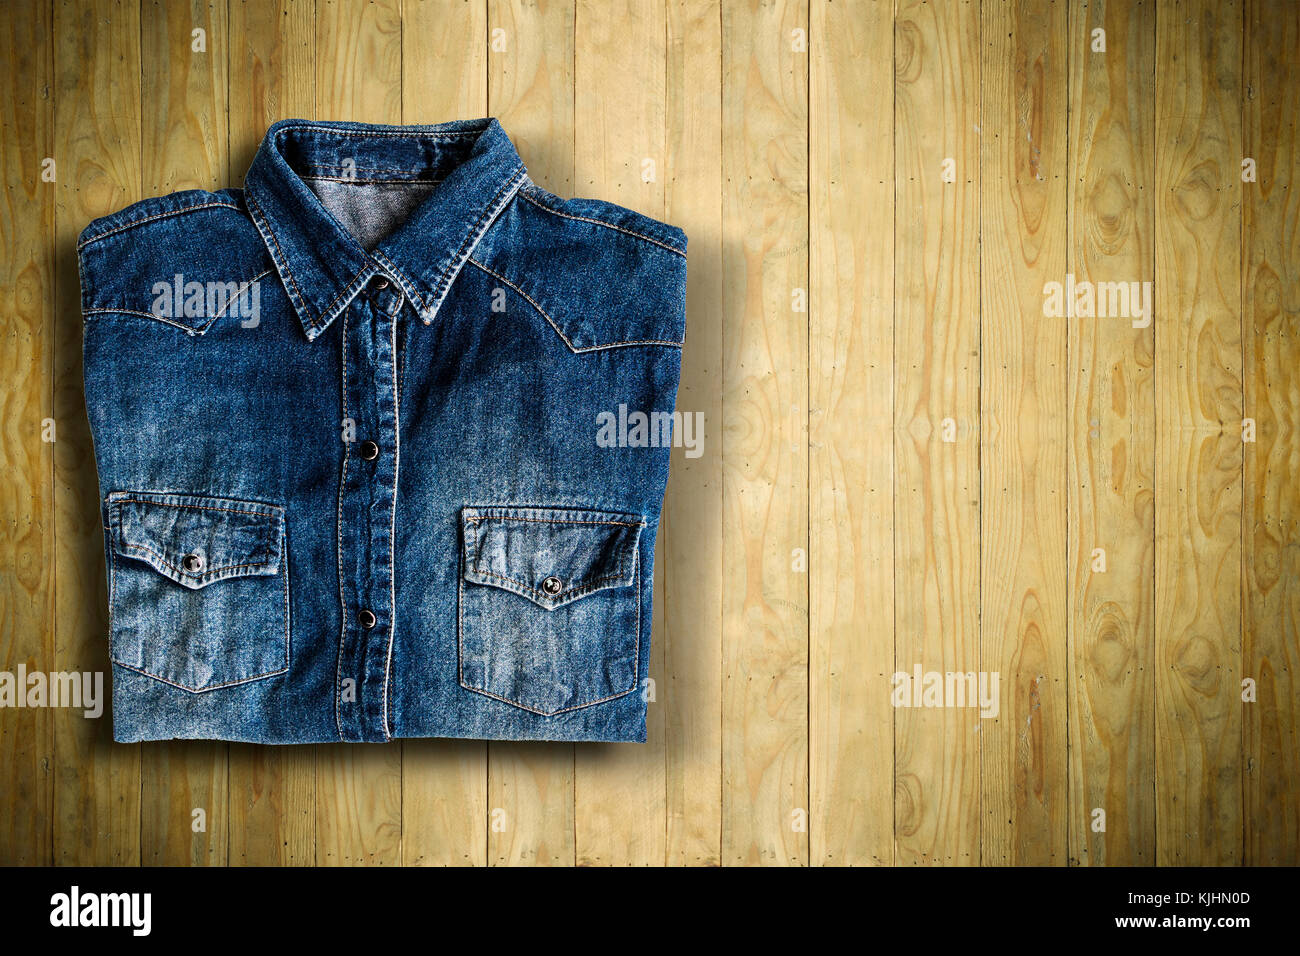 Top view of jeans shirt put on wooden table background Stock Photo